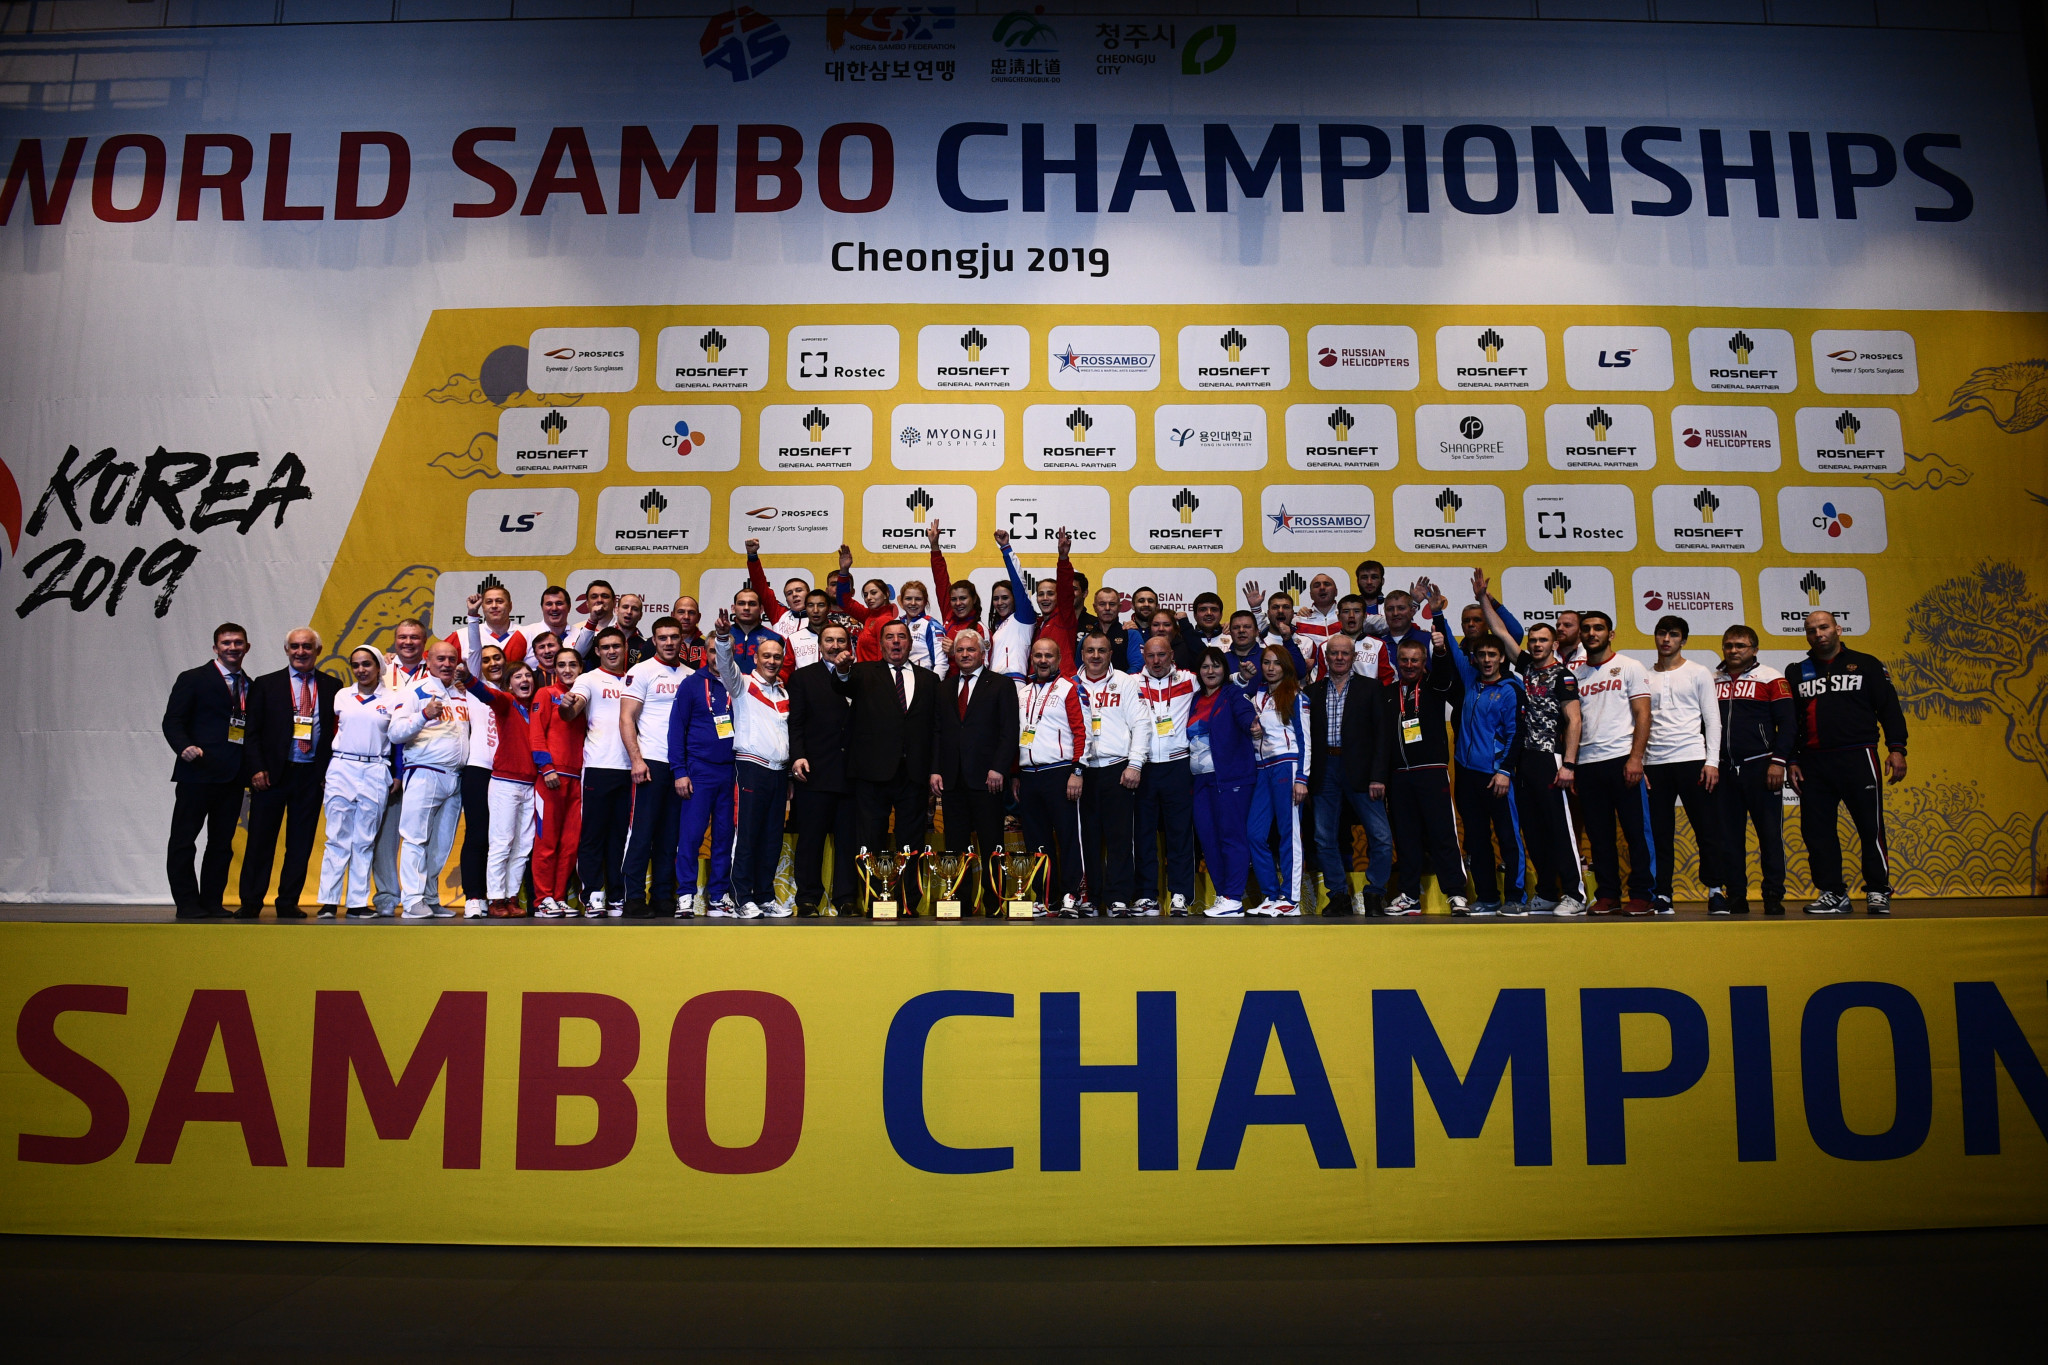 Russia surge to 20 golds to sweep team honours at World Sambo Championships